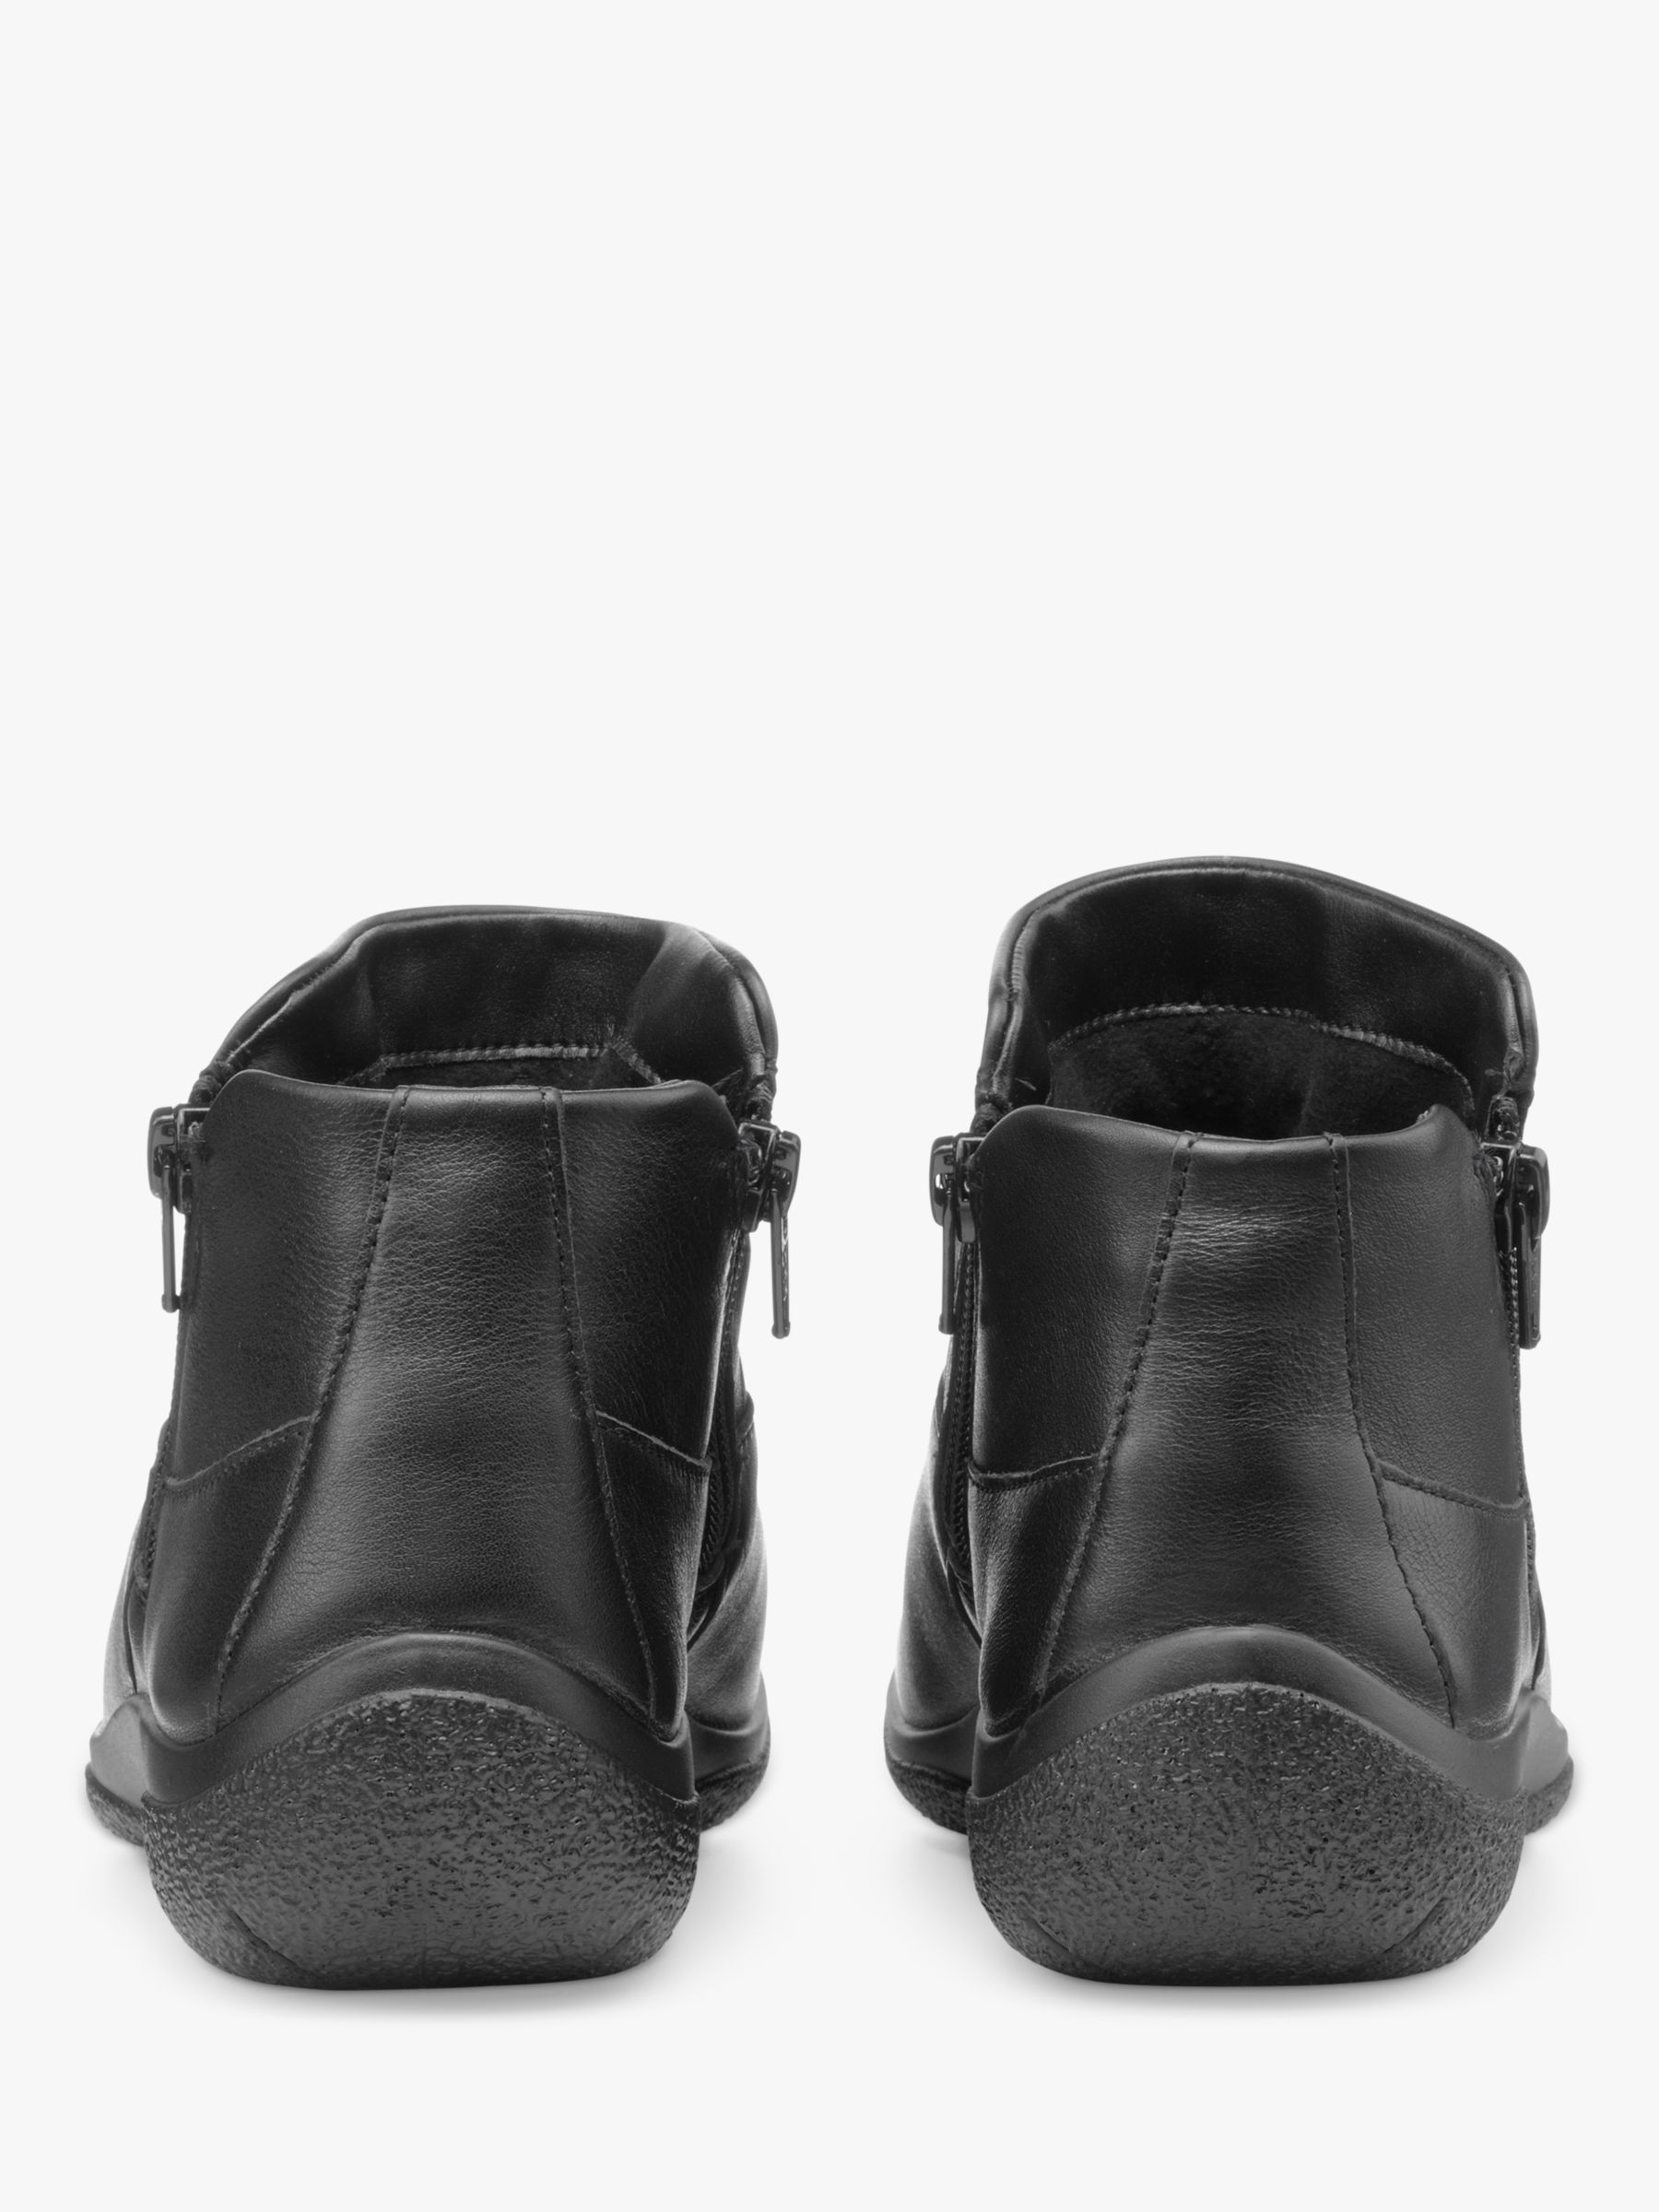 Hotter Murmur Leather Ankle Boots, Black, 7.5